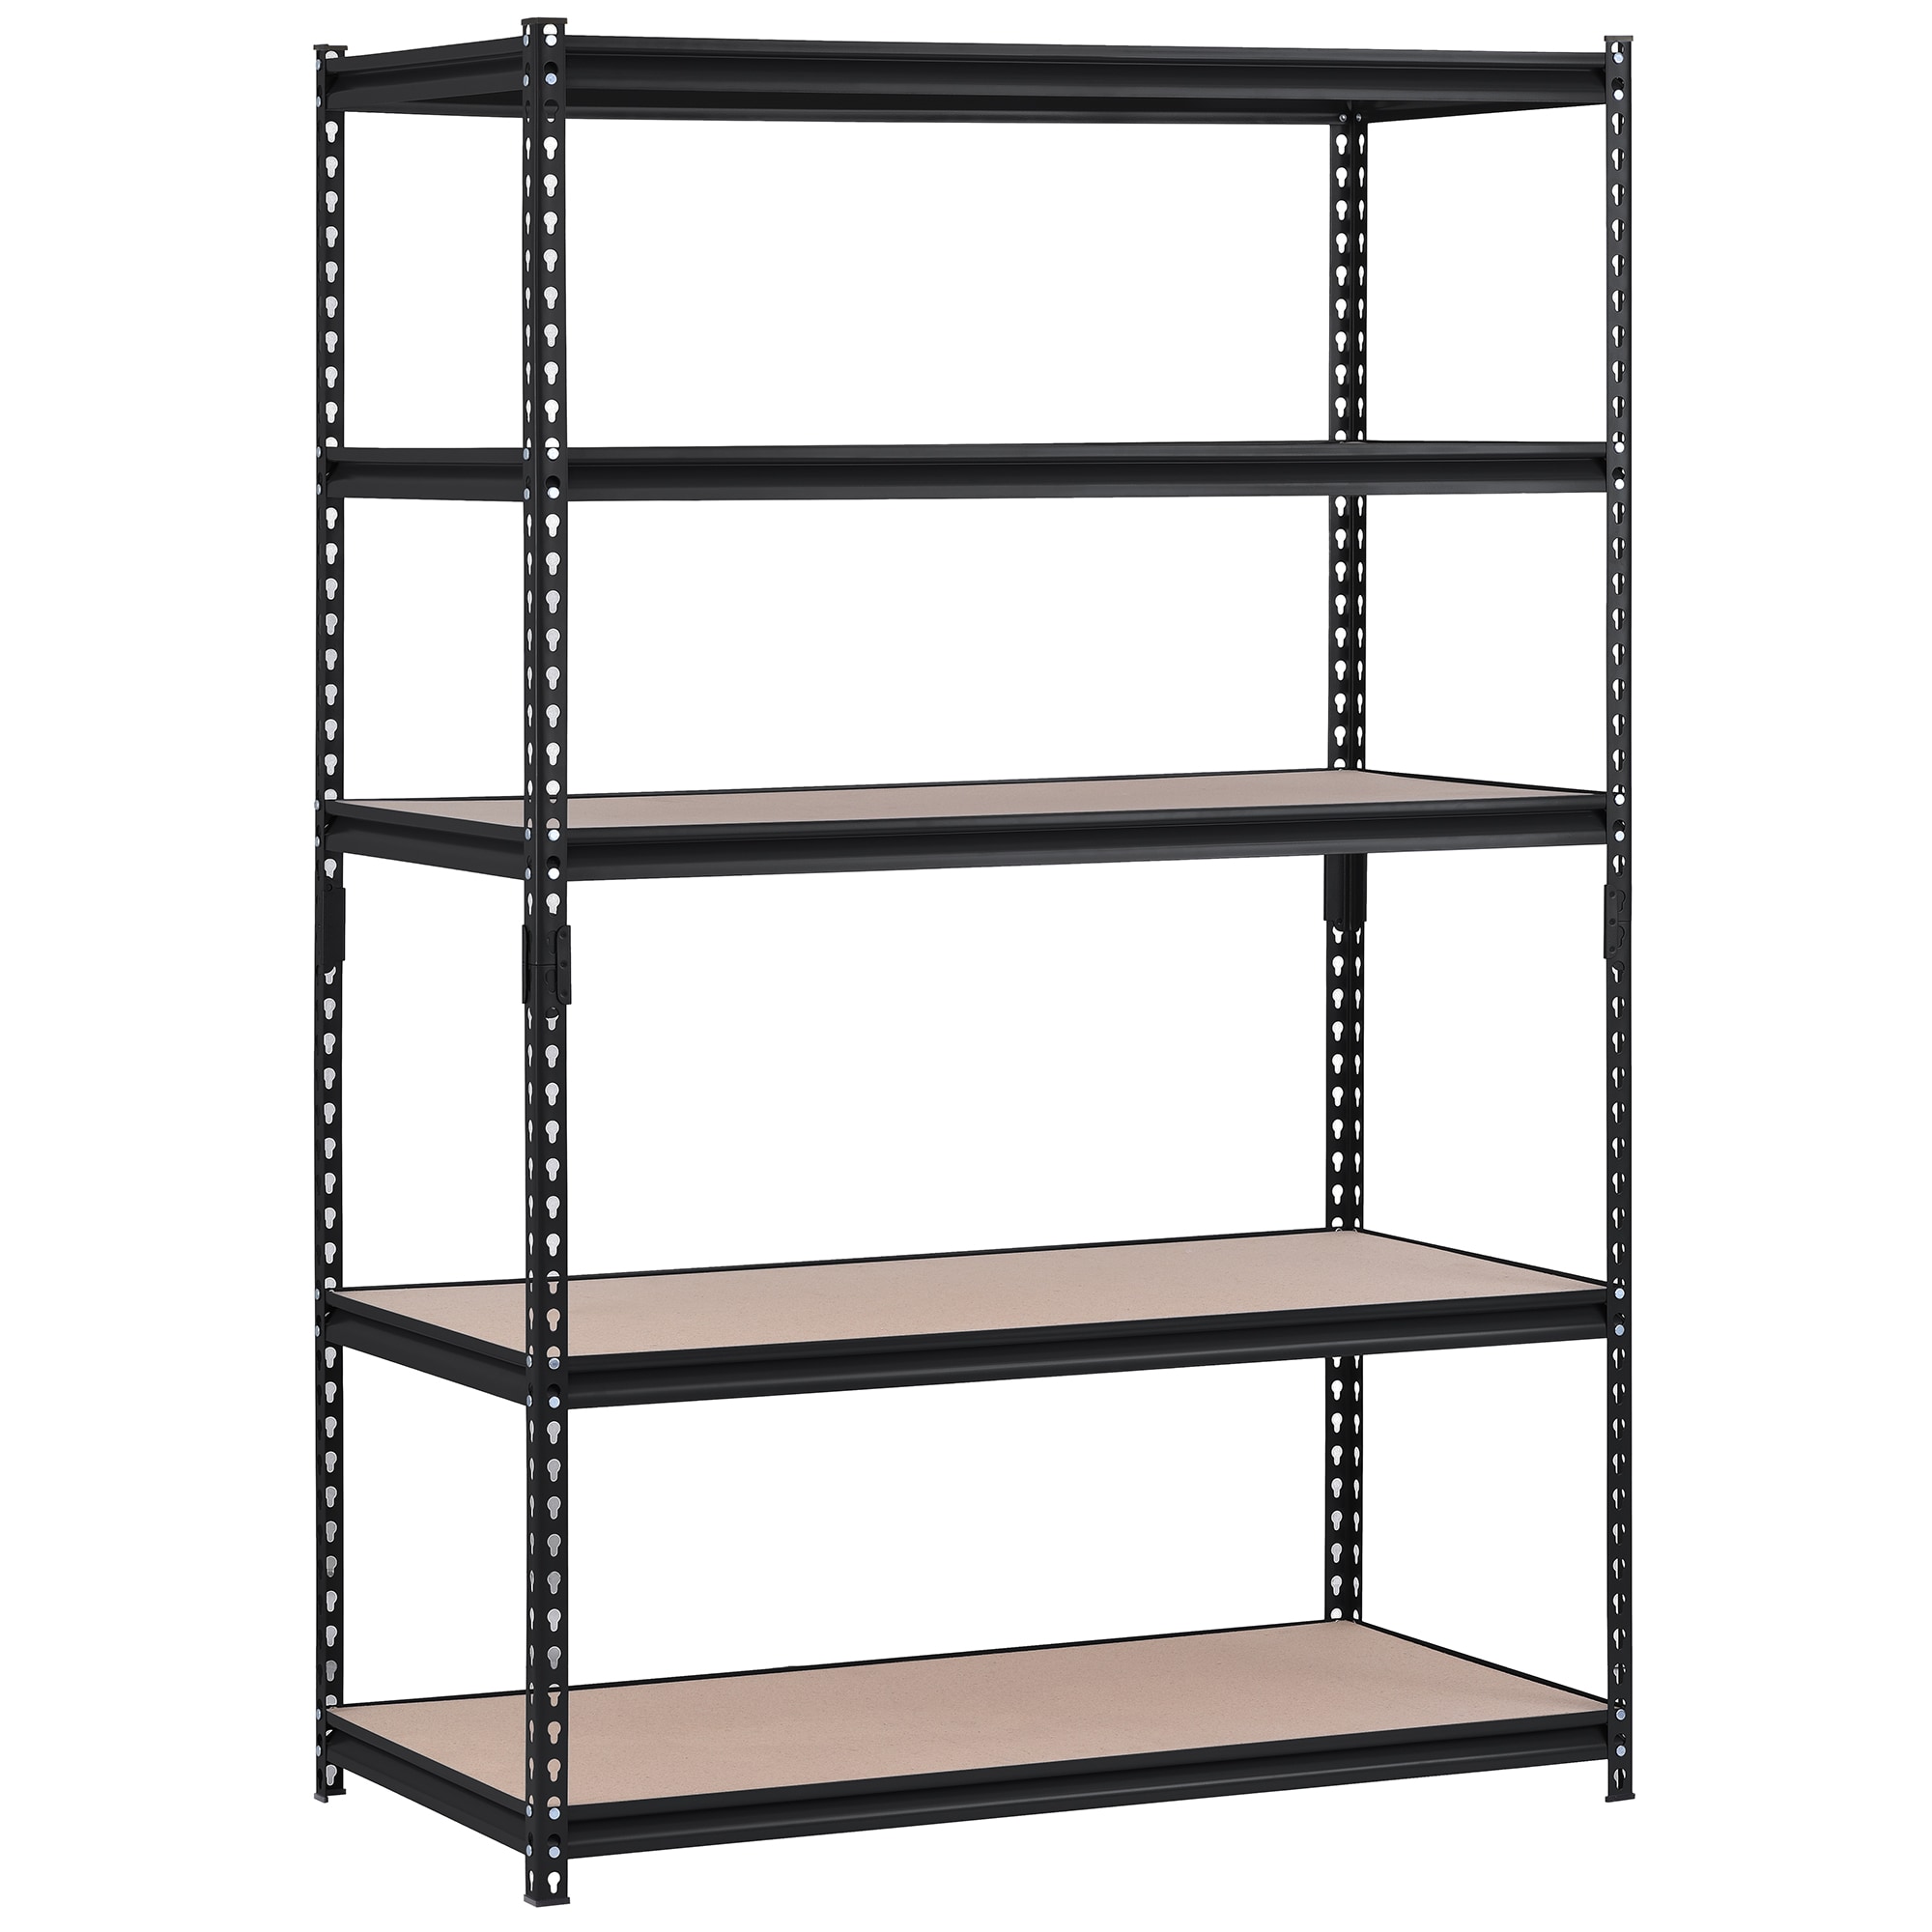  Ribbon Storage Organizers Rack Craft Ribbon Organizer Holder  Rack, 4 Tier Metal Wrapping Ribbon Display Stand with Removable Rod, Modern  Tabletop Storage Racks for Commercial (Color : Black, Size